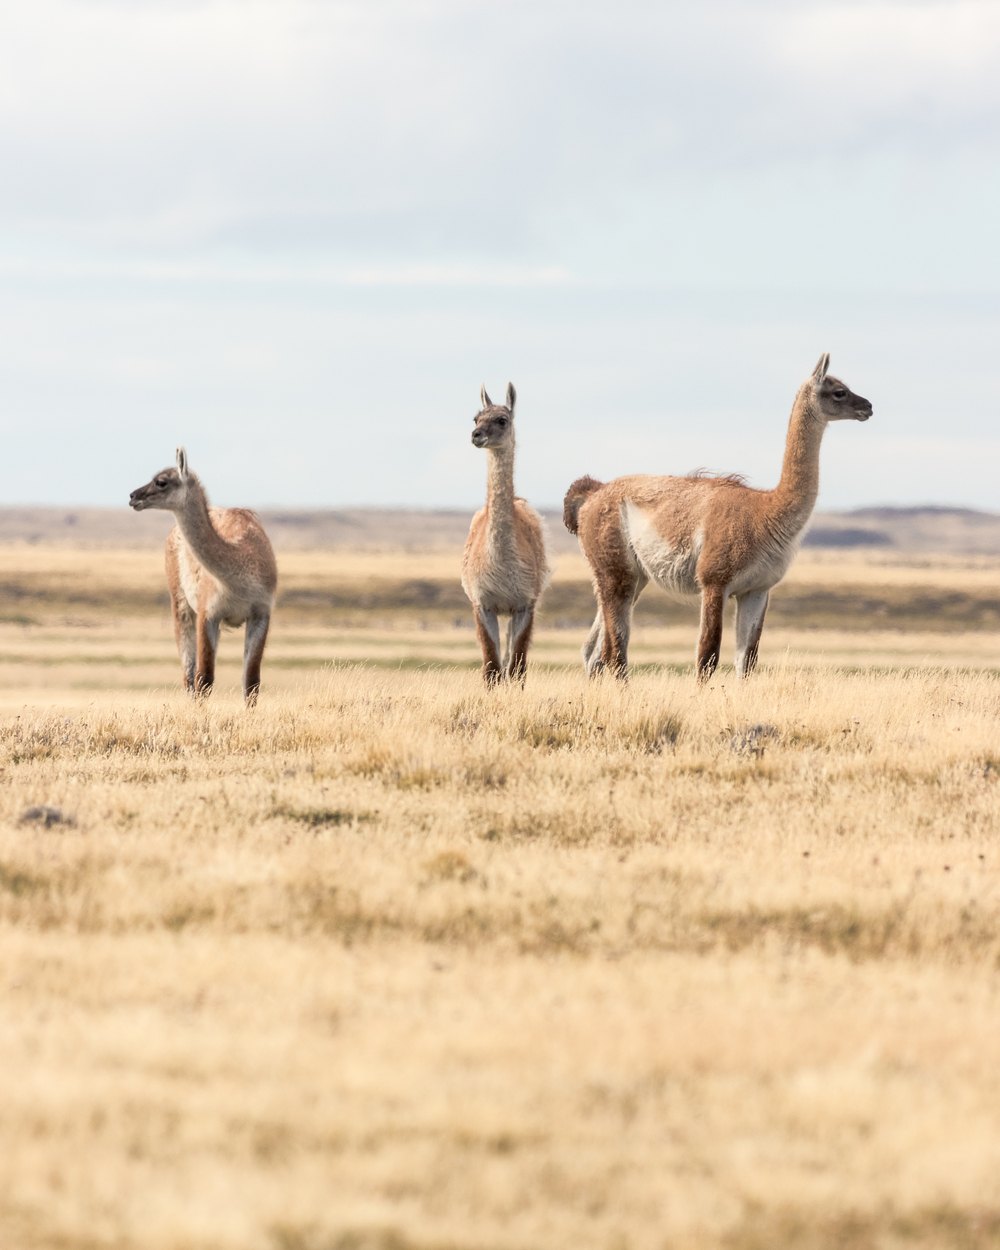 The chilean side of Tierra del Fuego is a home to many guanacos.